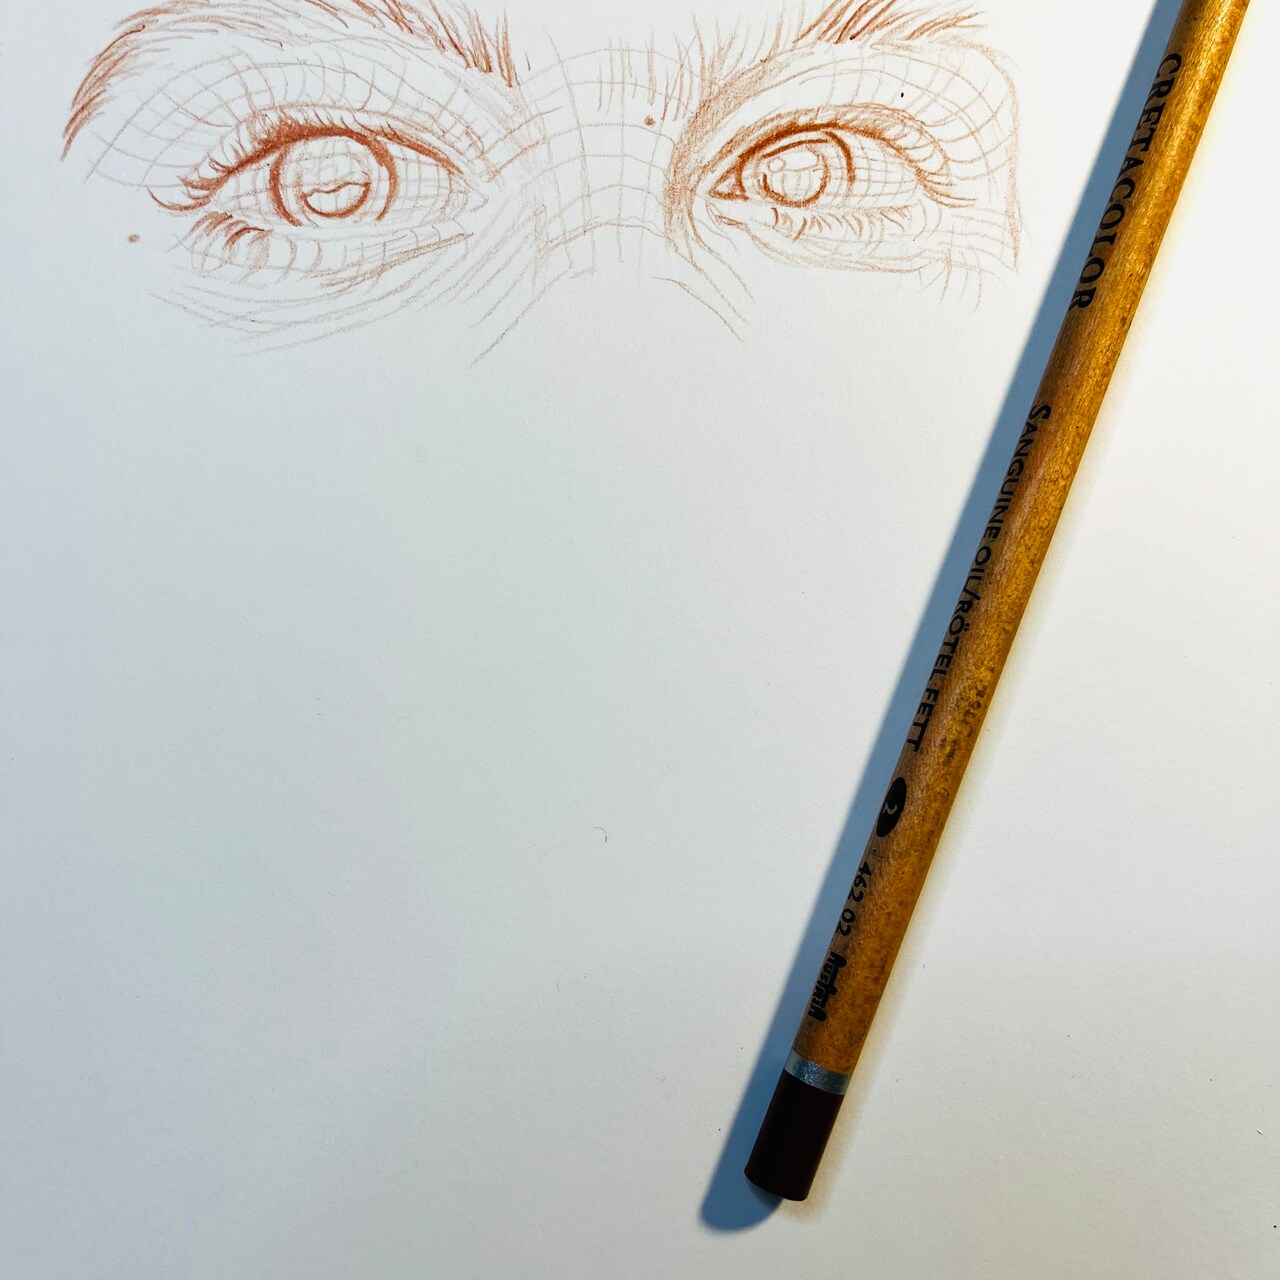 Drawing Expressive Eyes In Pen & Ink with @AdrienneHodgeArt